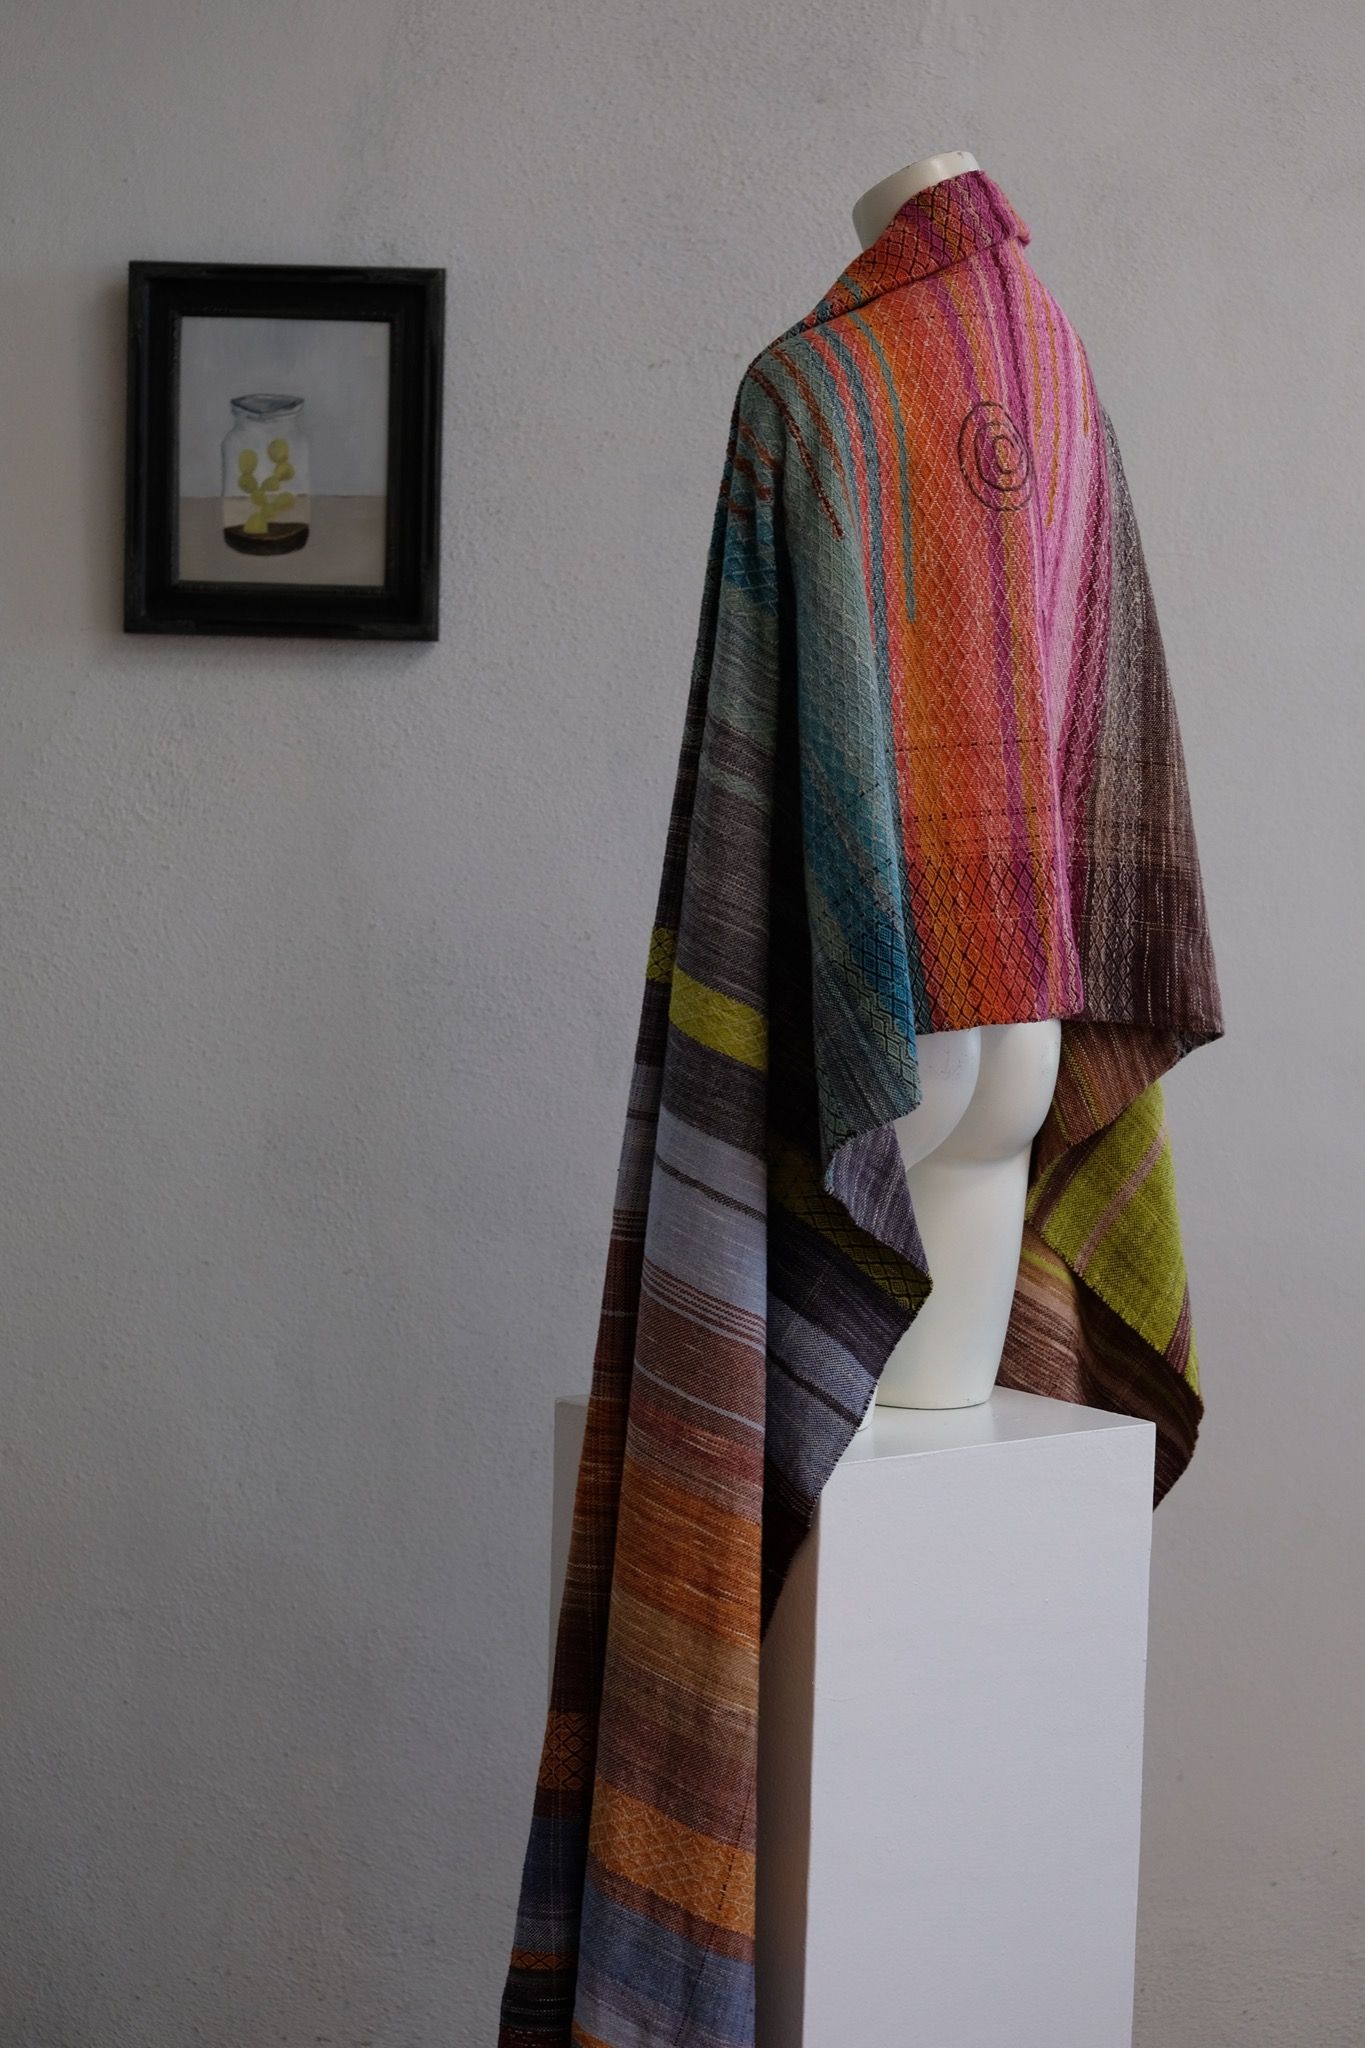 A brightly colored handwoven shawl is draped on a white mannequin in a white gallery space with wood floors.